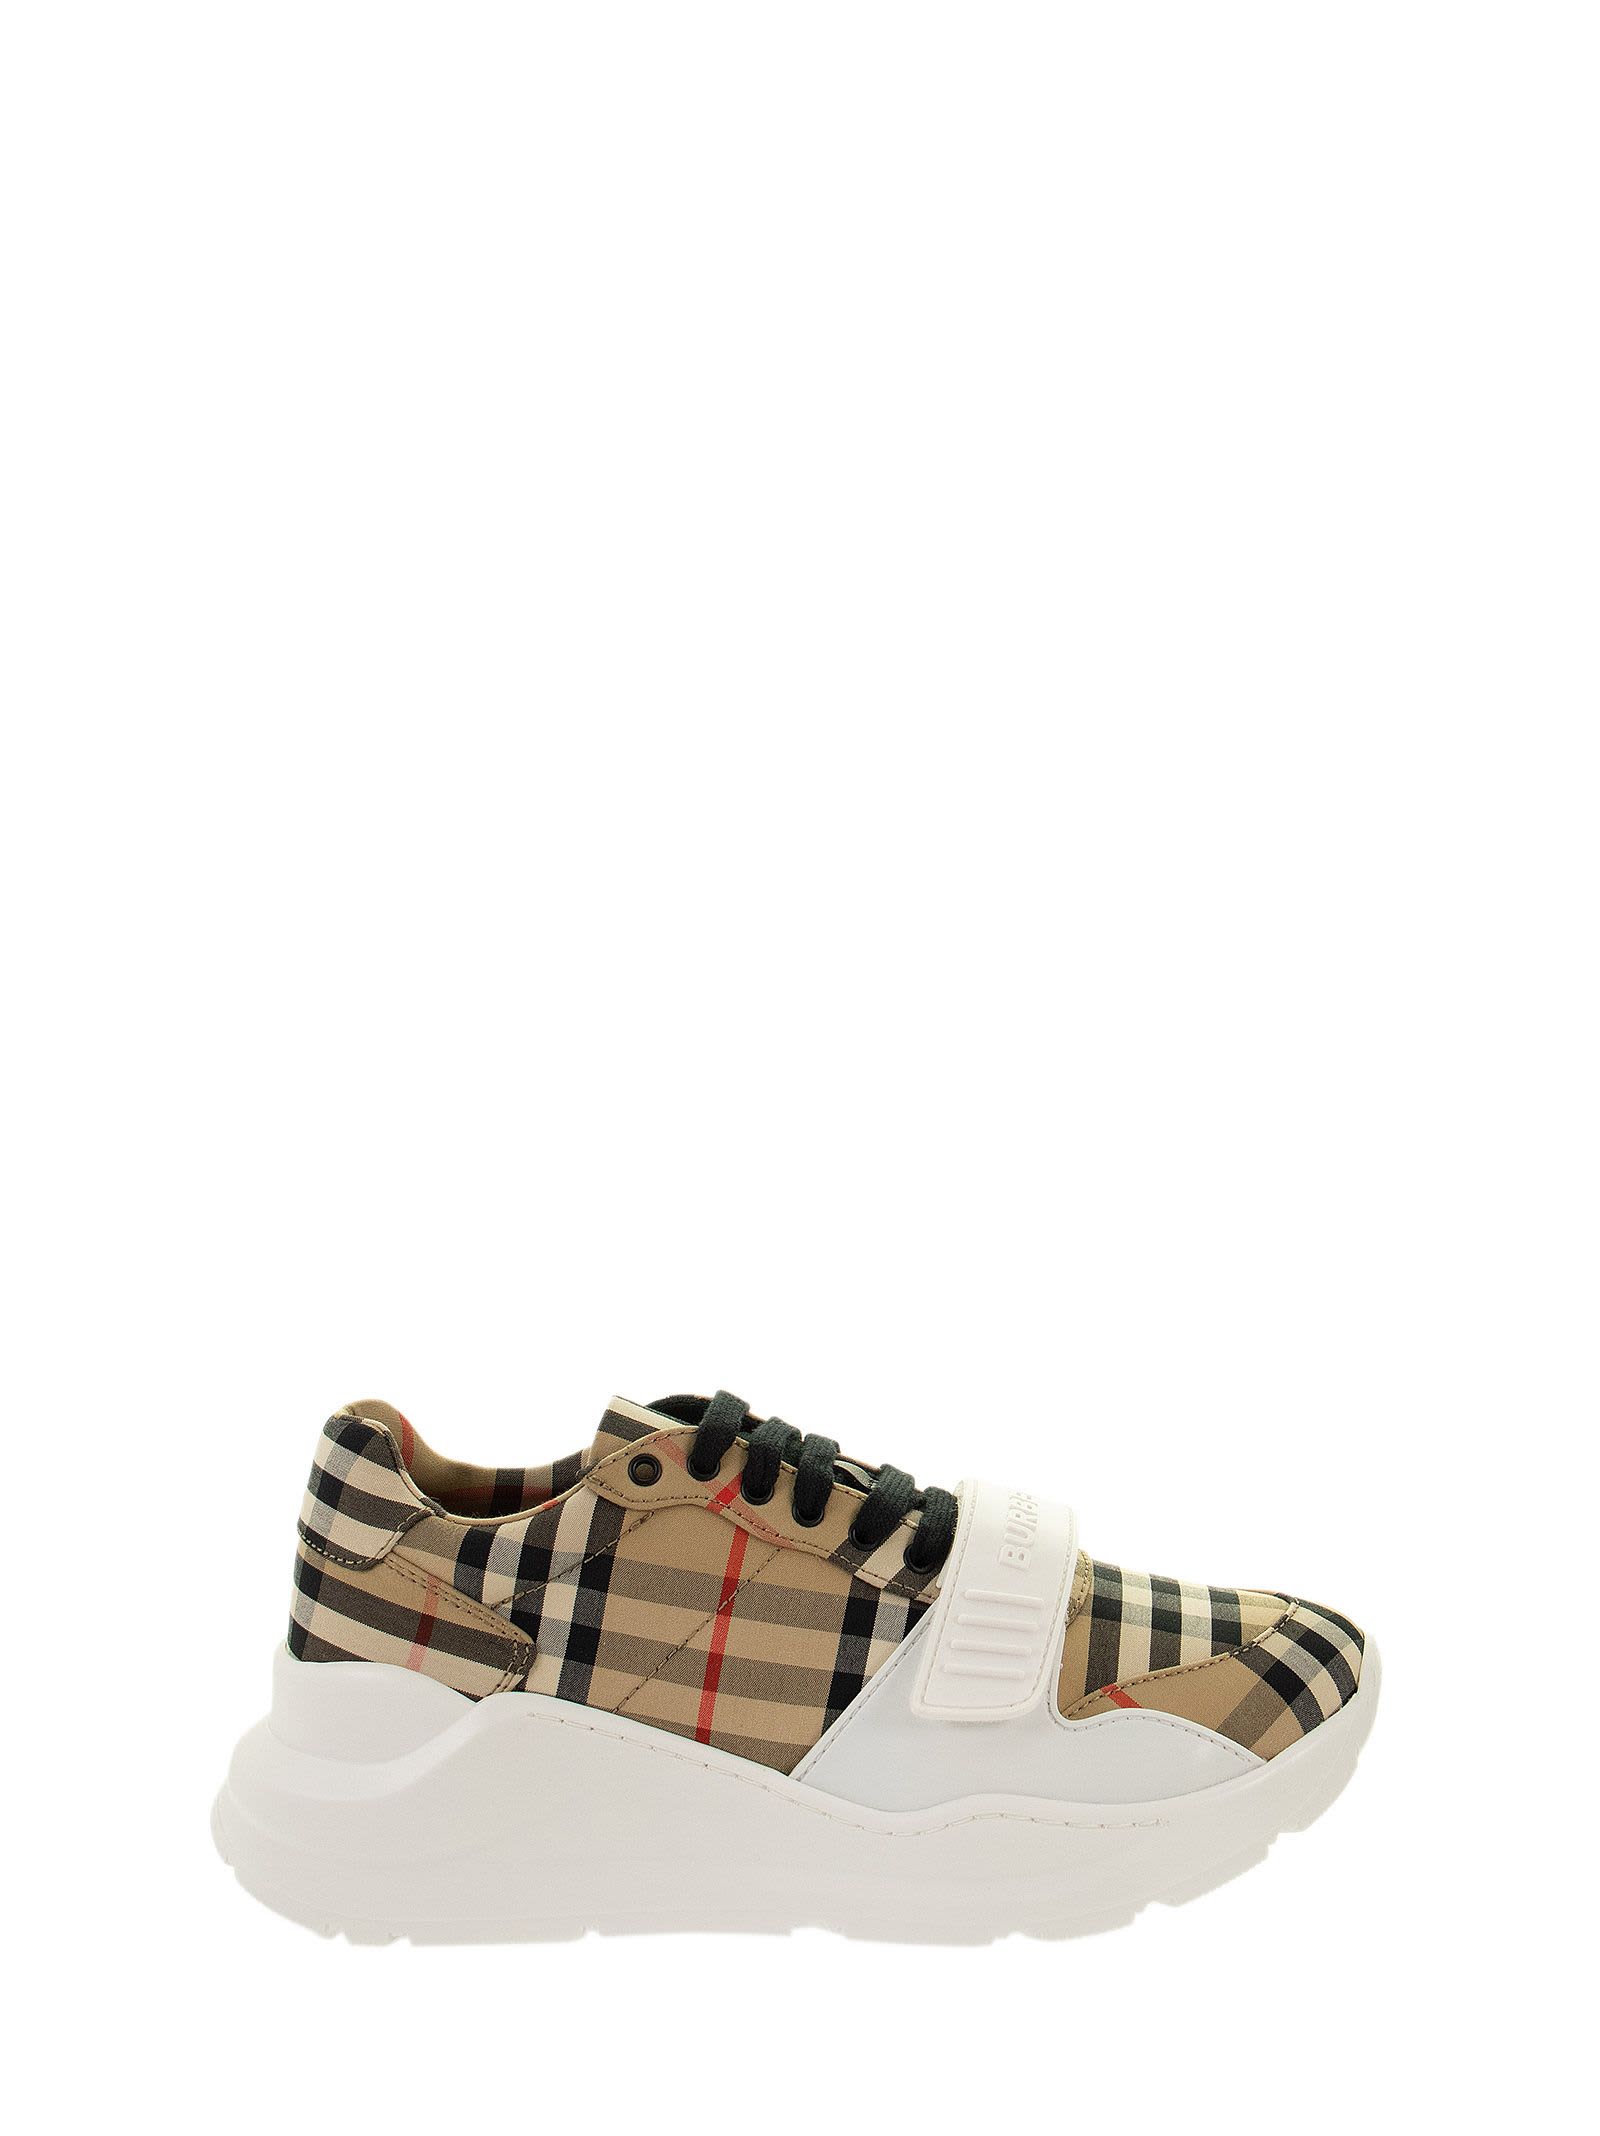 Buy Burberry Regis - Vintage Check Cotton Trainer online, shop Burberry shoes with free shipping